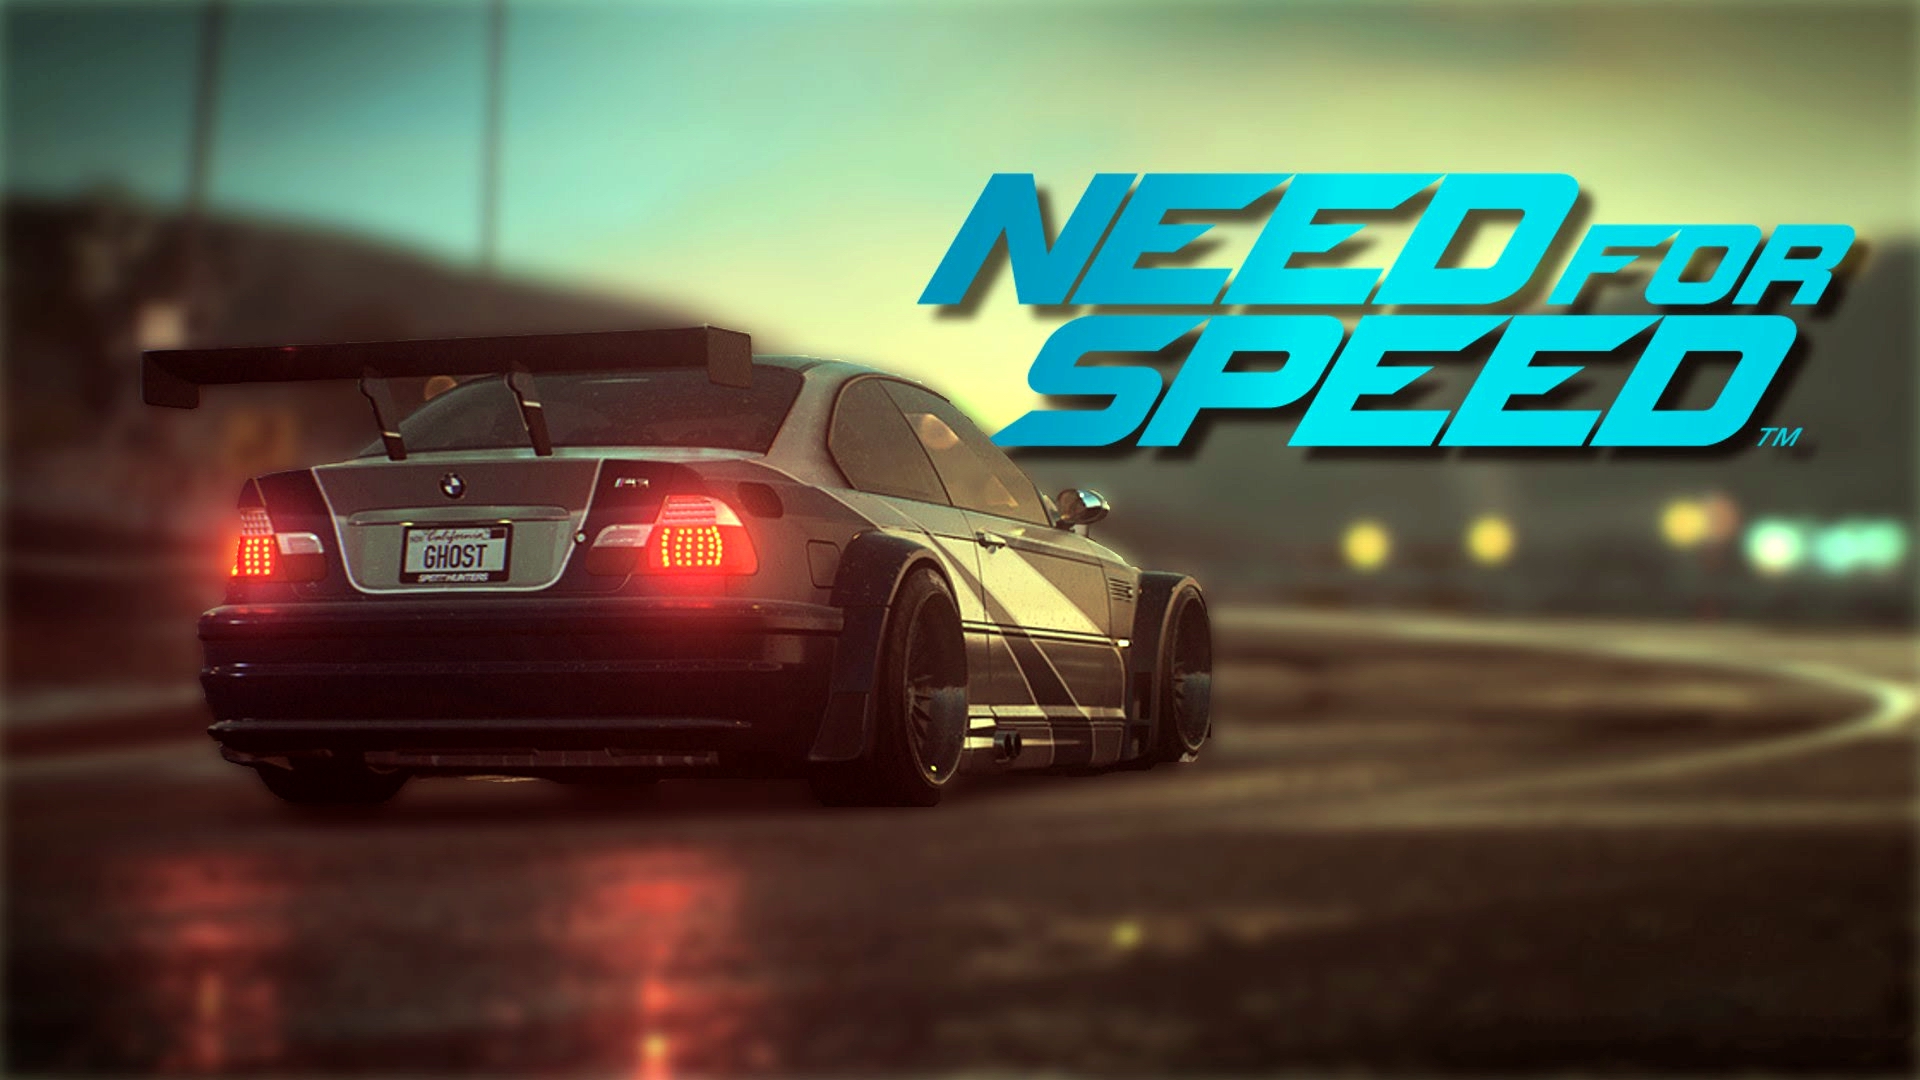 Песни из игры need for speed. Need for Speed 2015 ps4. Need for Speed (игра, 2015). Нид фор СПИД NFS 2015. Need for Speed most wanted Payback.